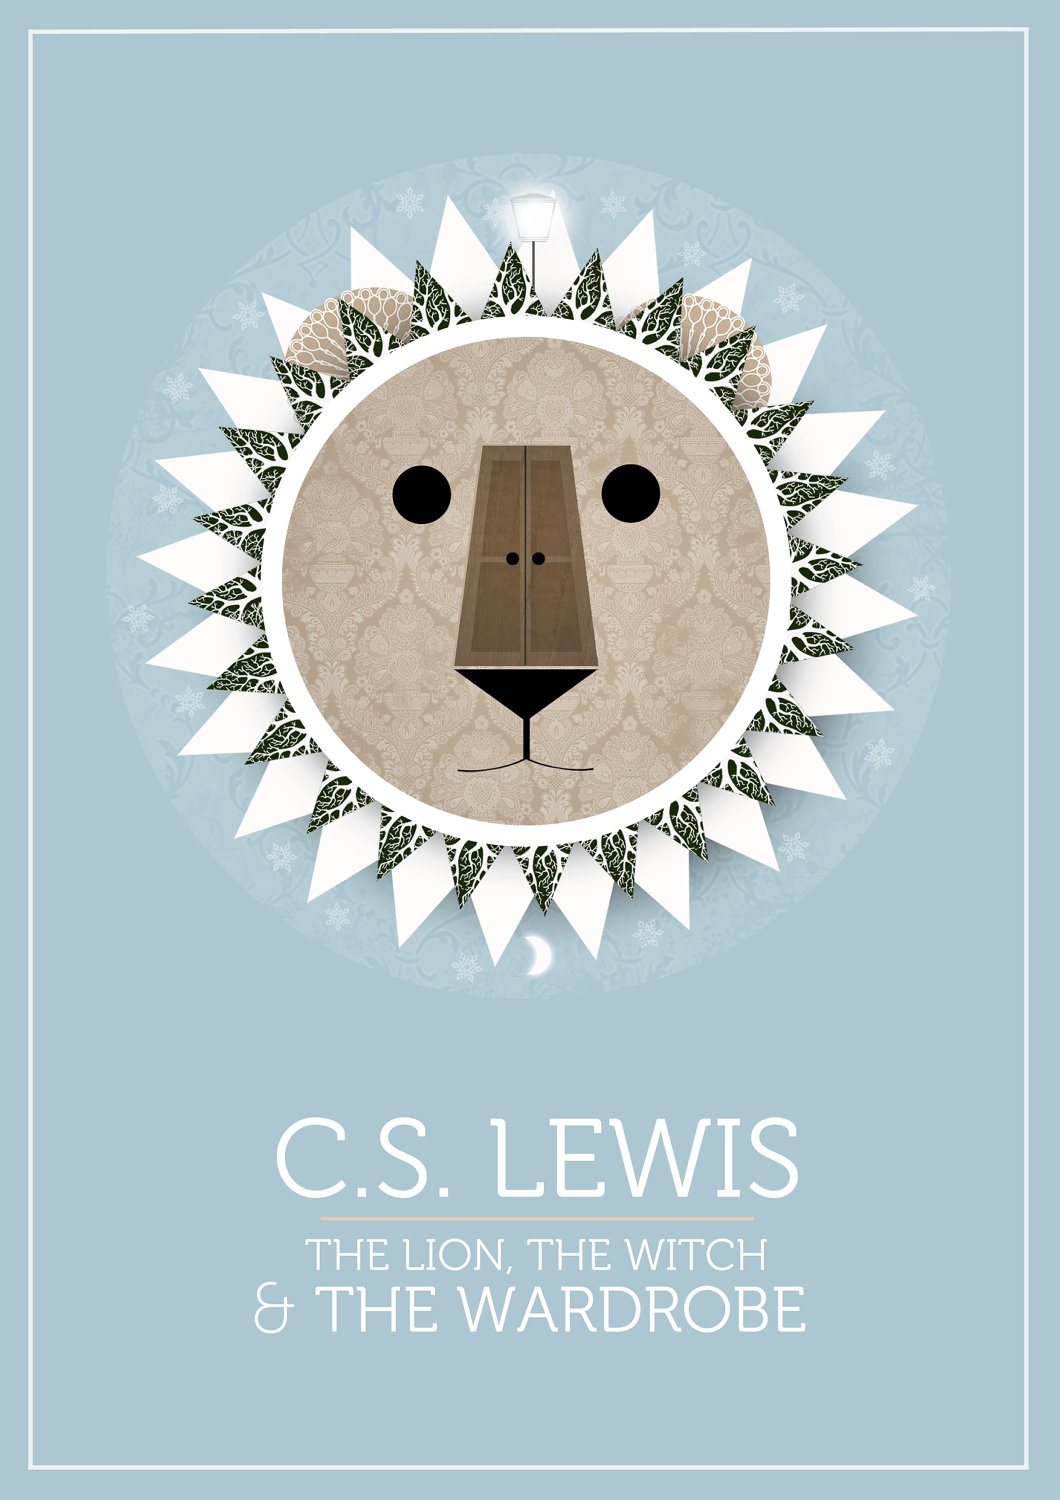 The Lion, the Witch, and the Wardrobe, by C.S. Lewis - best book to read